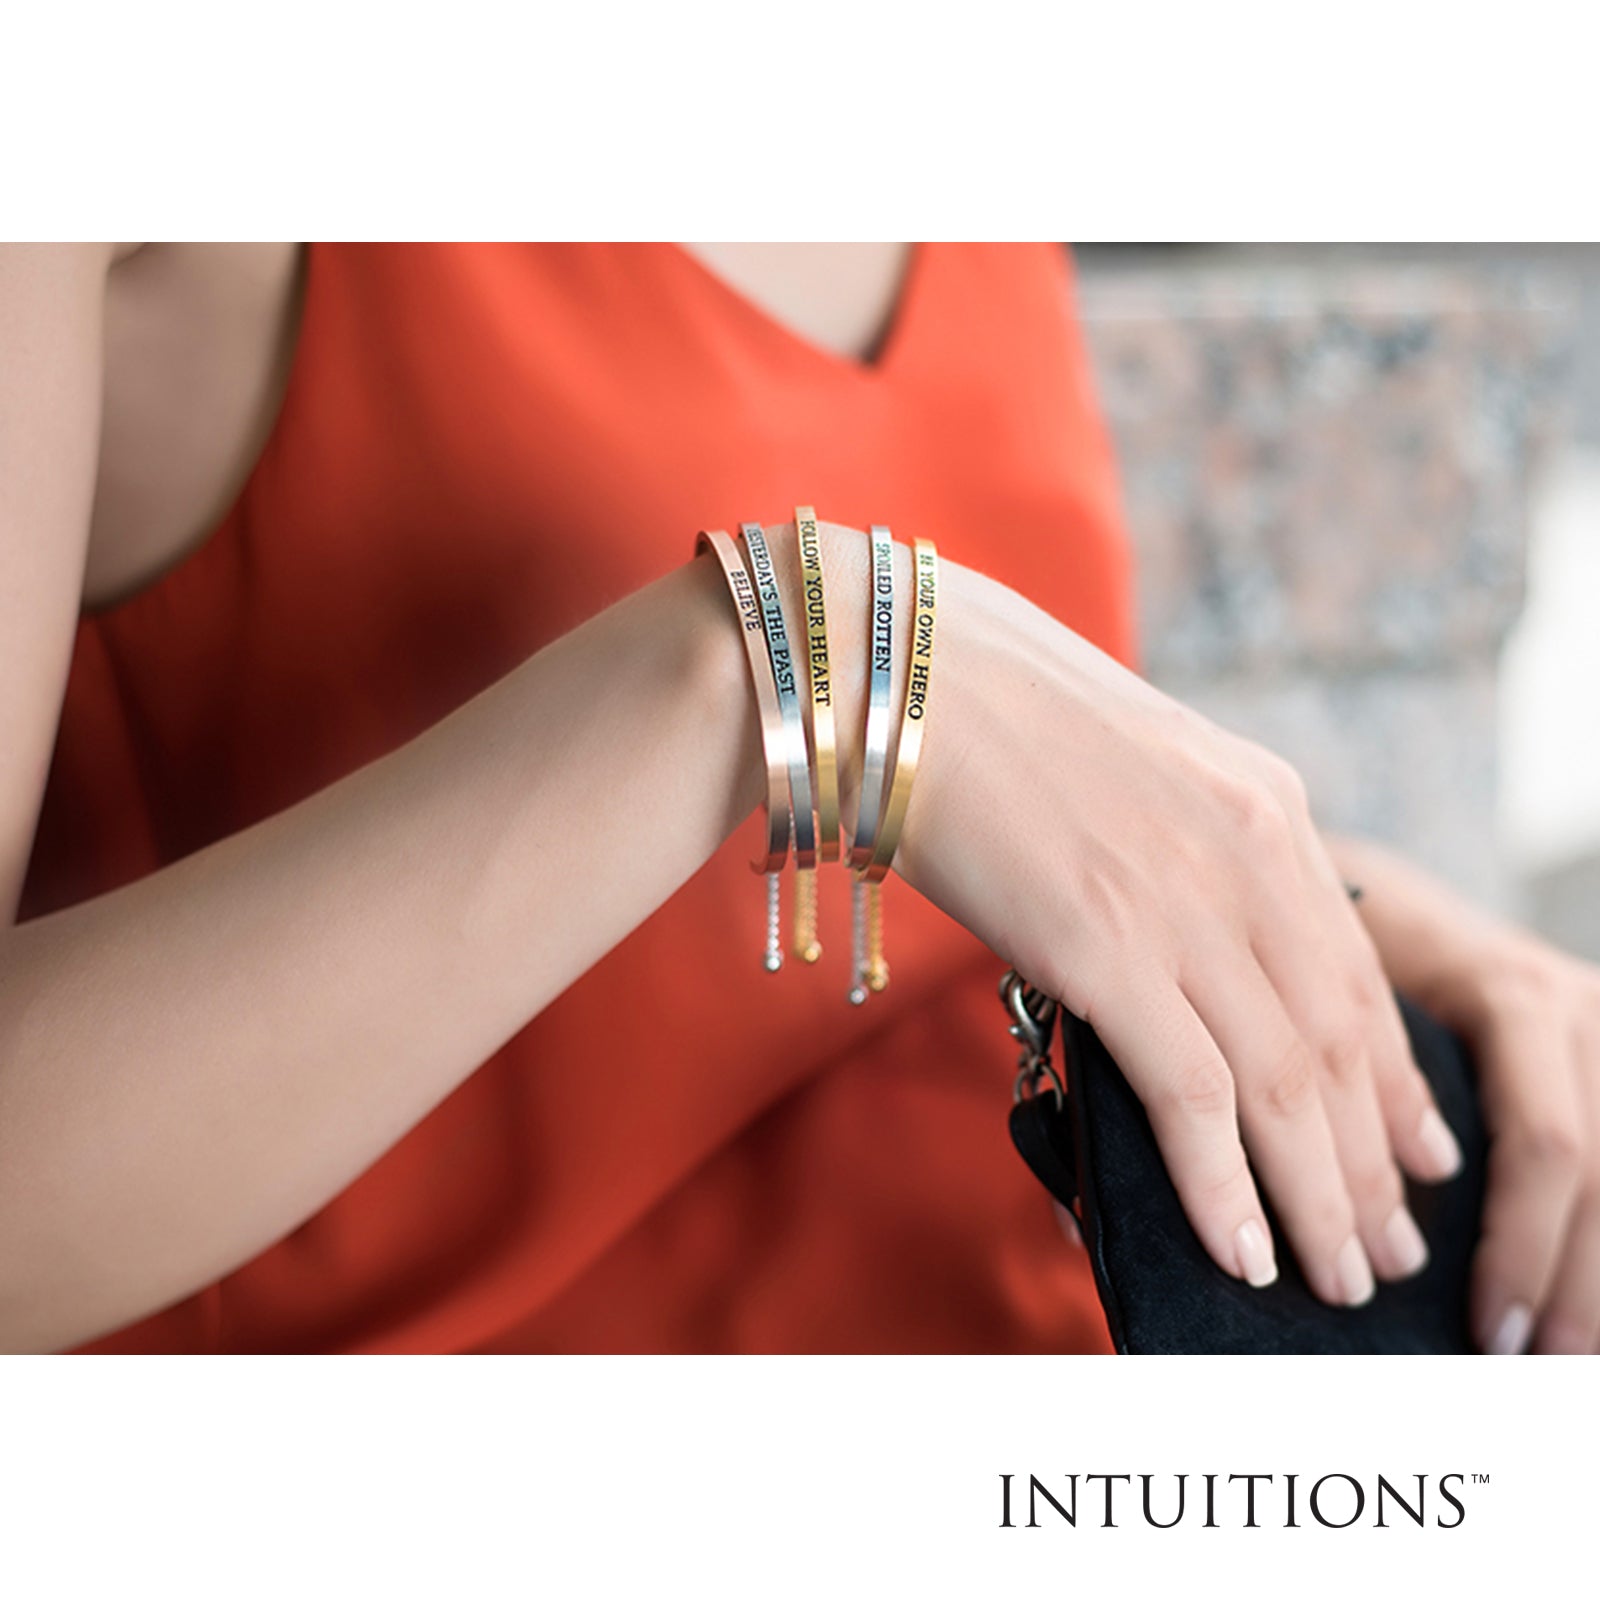 Intuitions Stainless Steel Satin Square Peace With Doves Bangle Bracelet fine designer jewelry for men and women